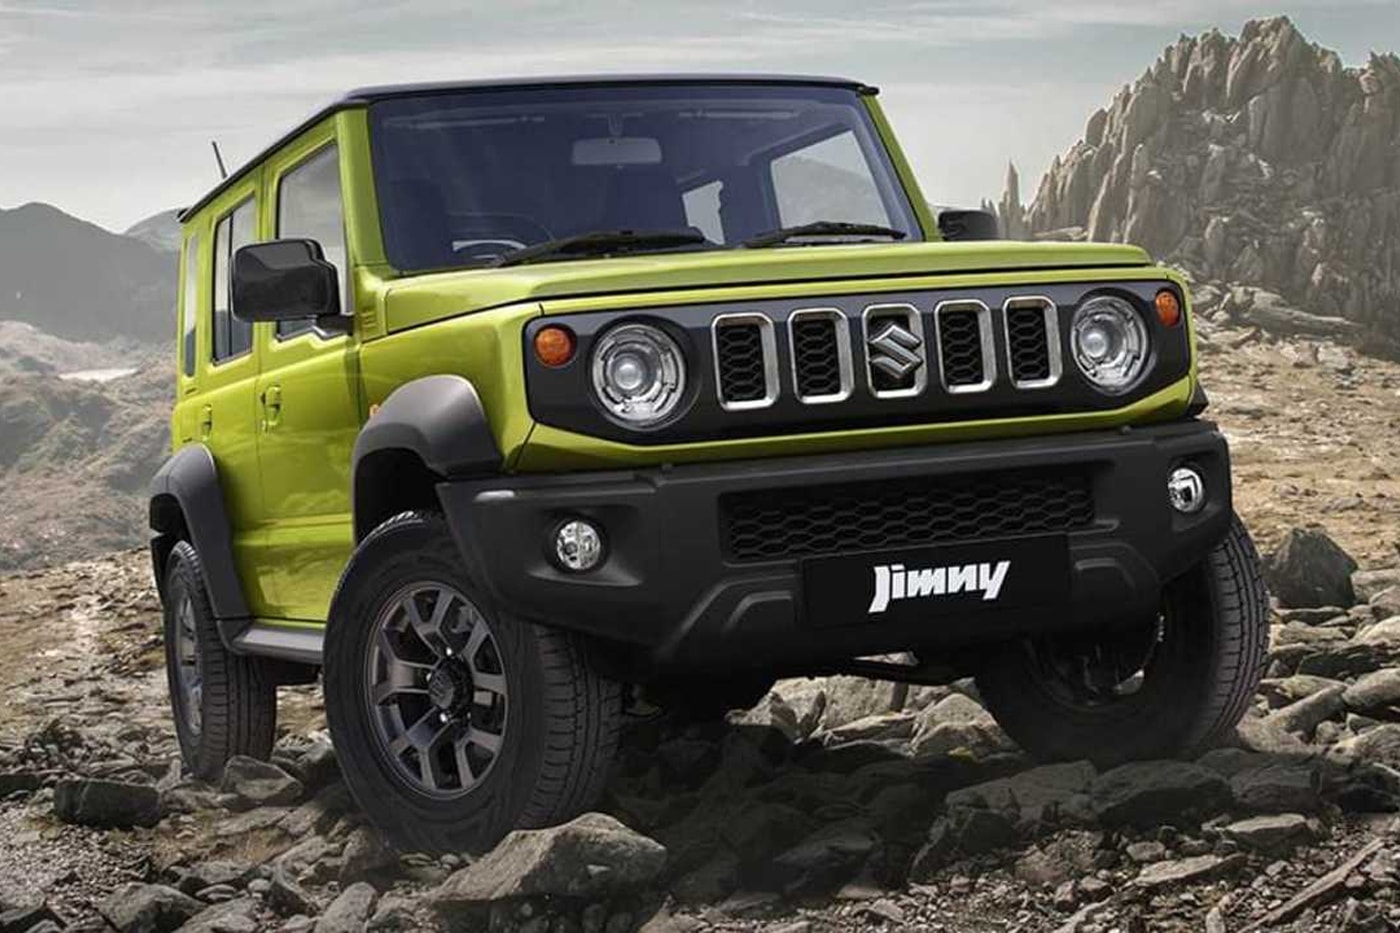 2022 Suzuki Jimny Lite announced with fewer features and lower price tag